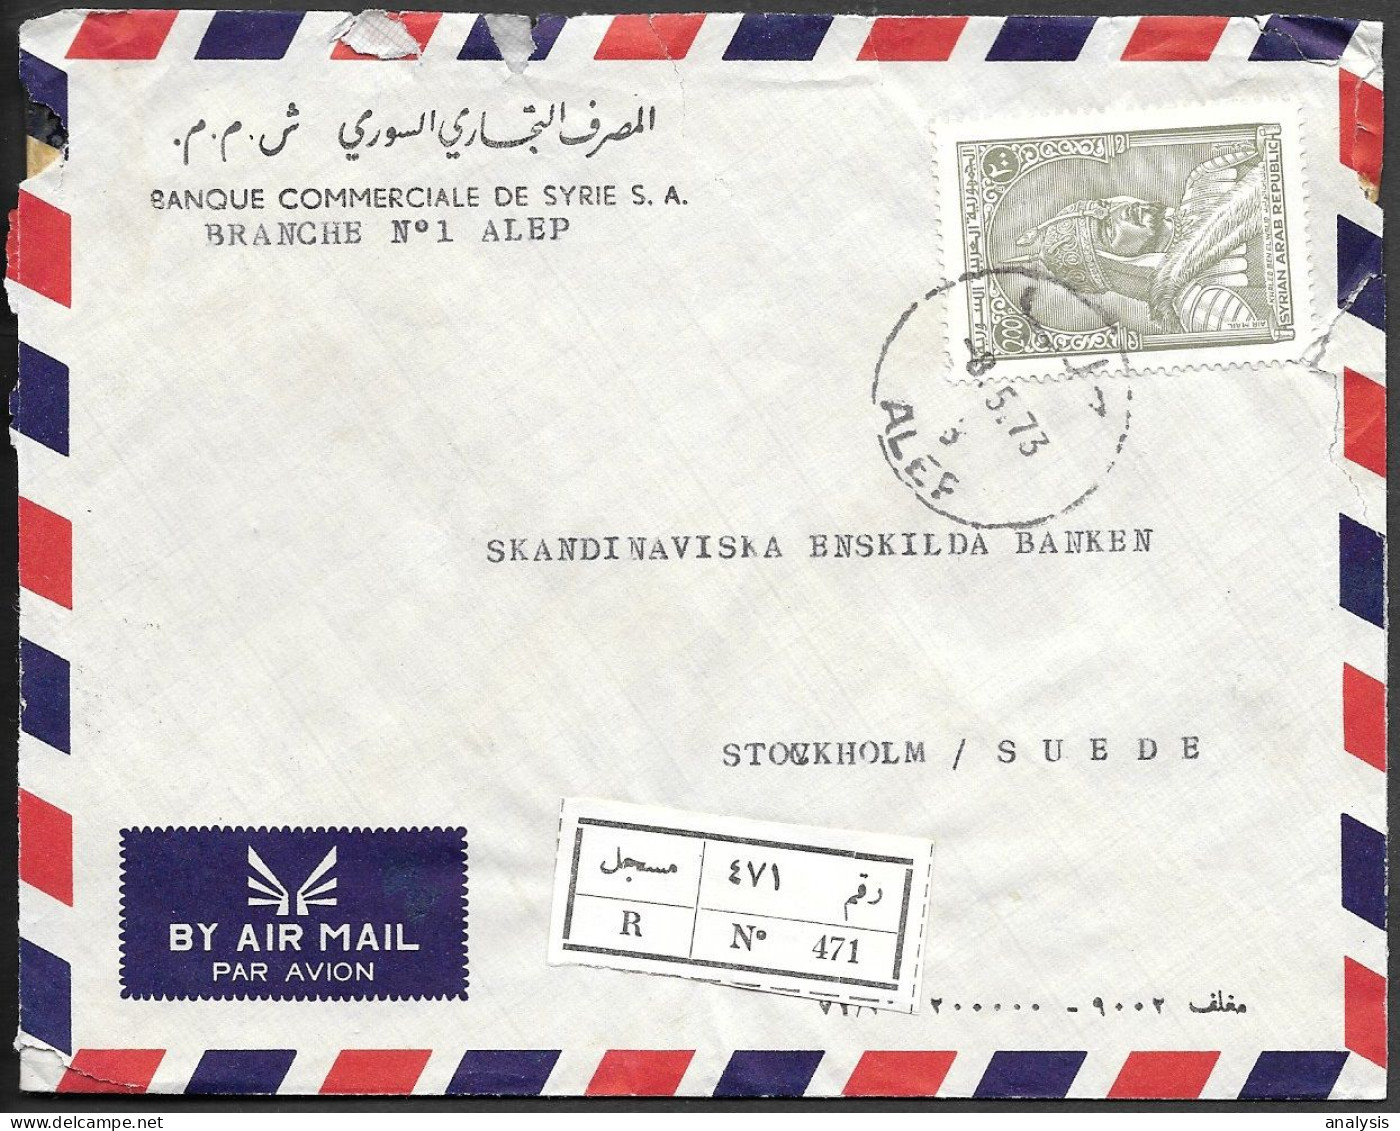 Syria Aleppo Registered Cover Mailed To Sweden 1973. 200P Rate Khalid Ibn Al-Walid Stamp - Syria